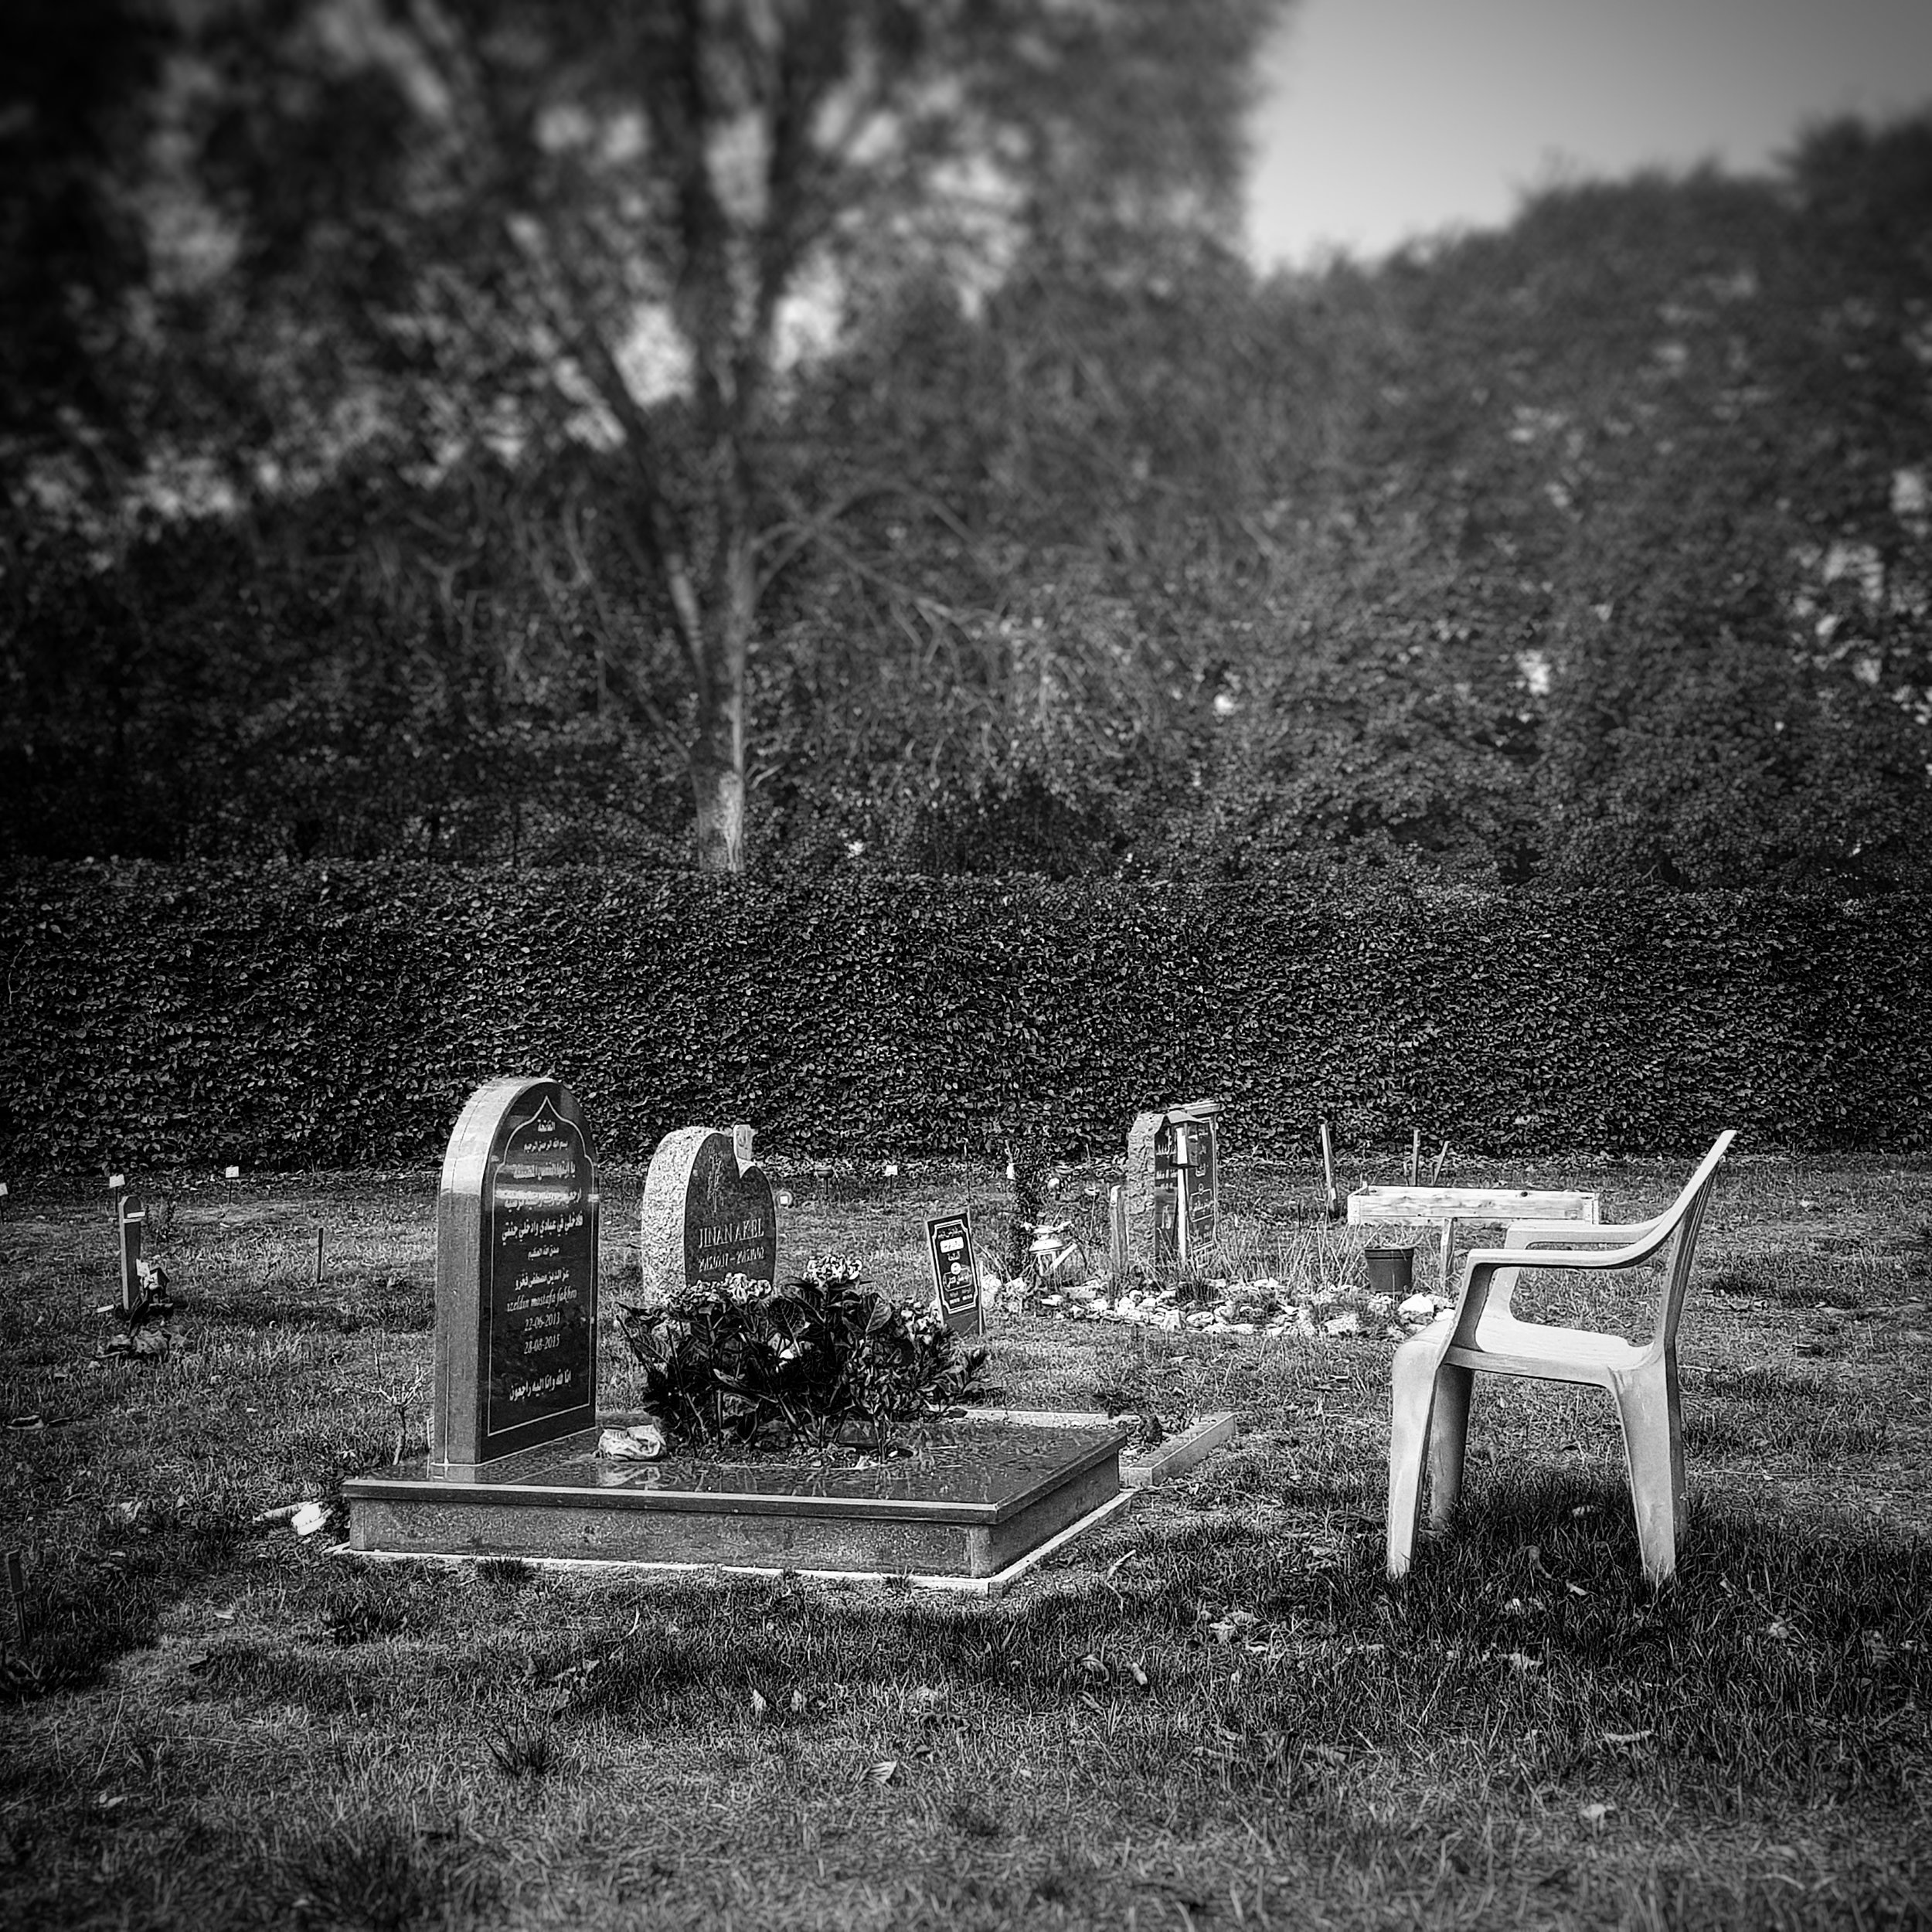 Day 230 - August 18: At the cemetery